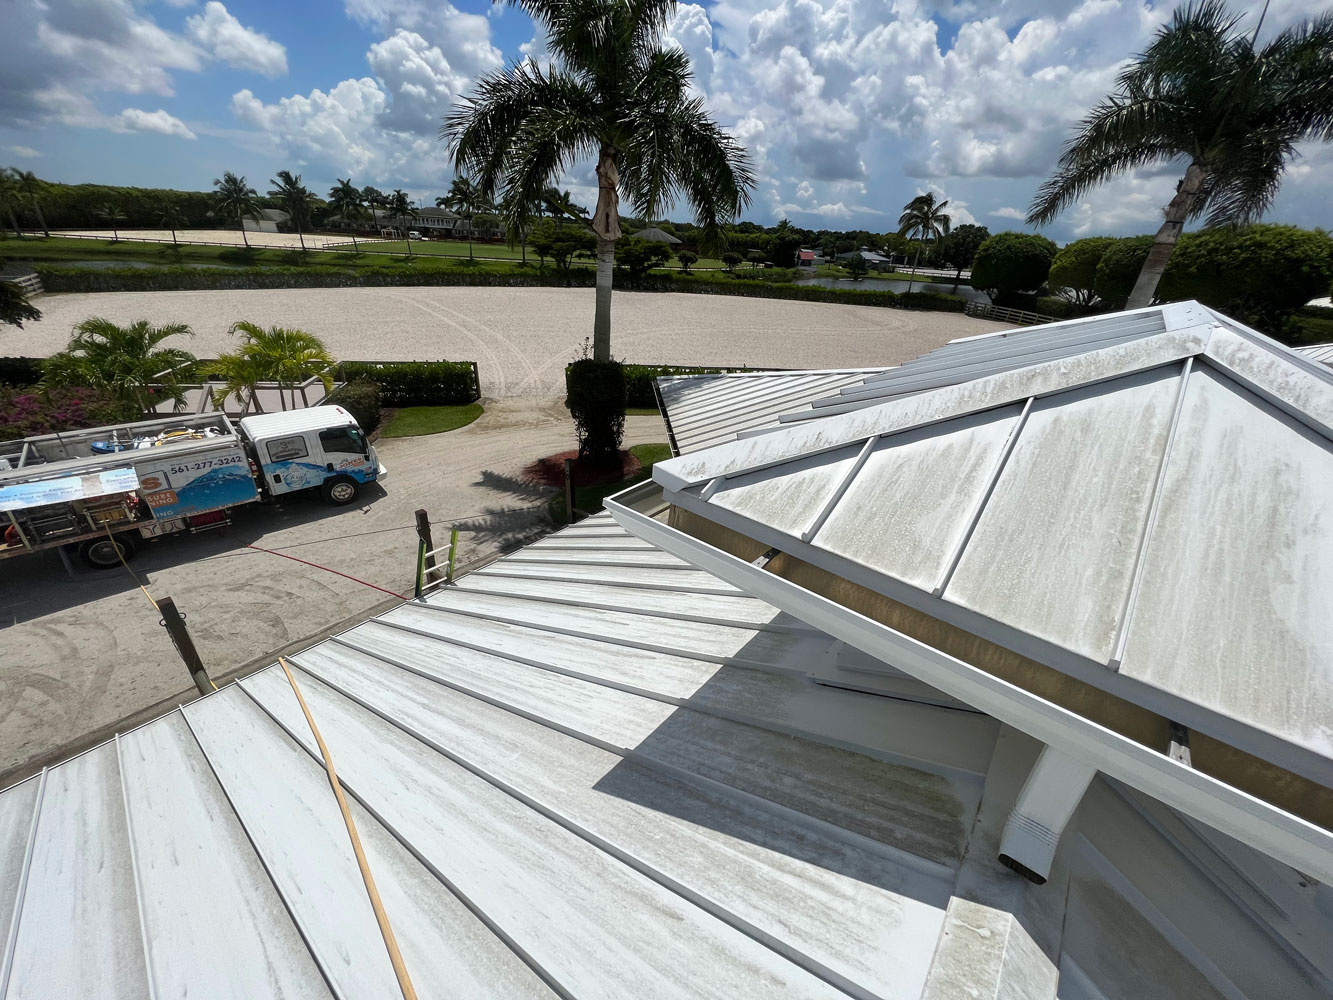 6 Step Cleaning Process For Making Roofs Sparkle